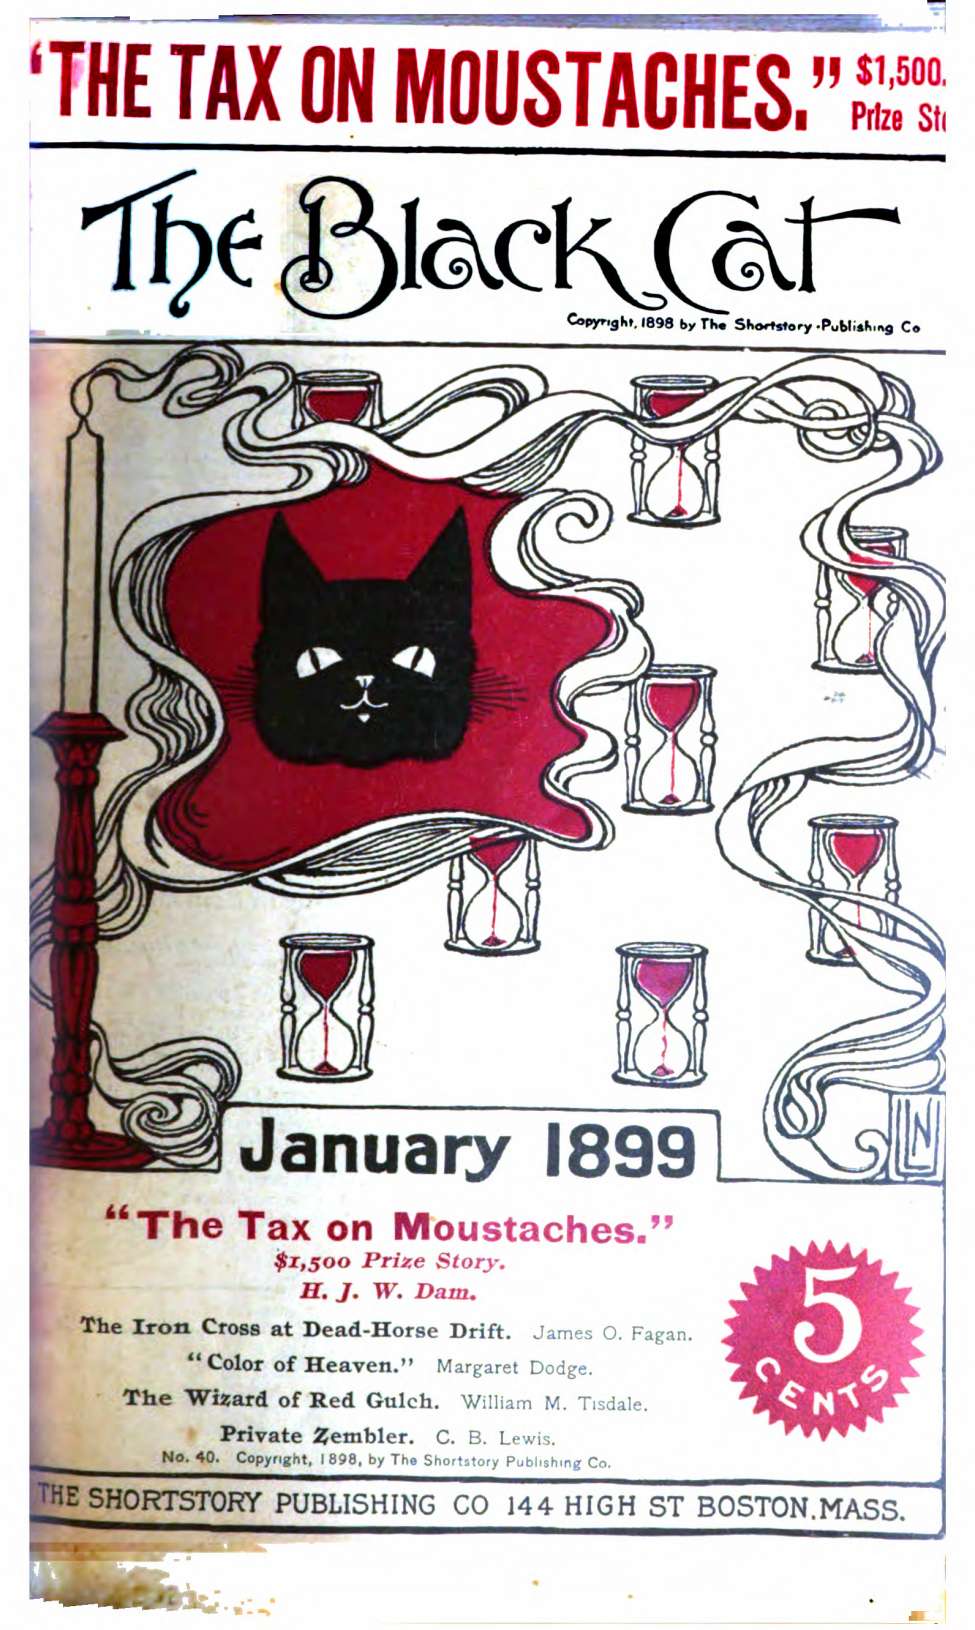 Book Cover For The Black Cat v4 4 - The Tax on Moustaches - H. J. W. Dam